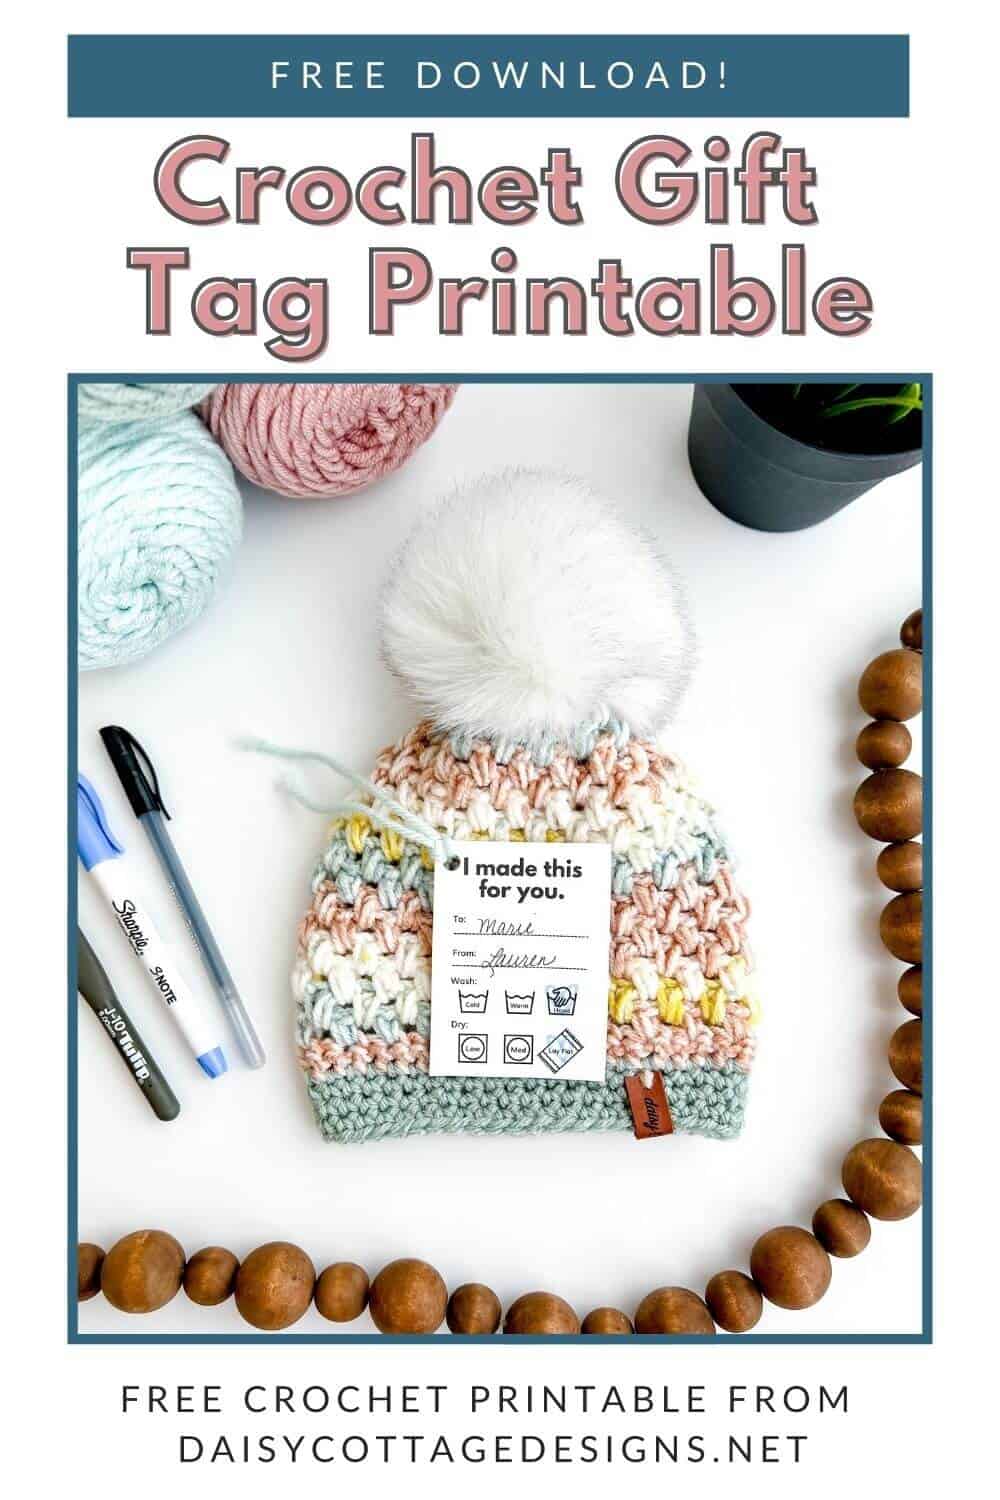 Gift crochet gifts in style using this crochet gift tag printable from Daisy Cottage Designs. 